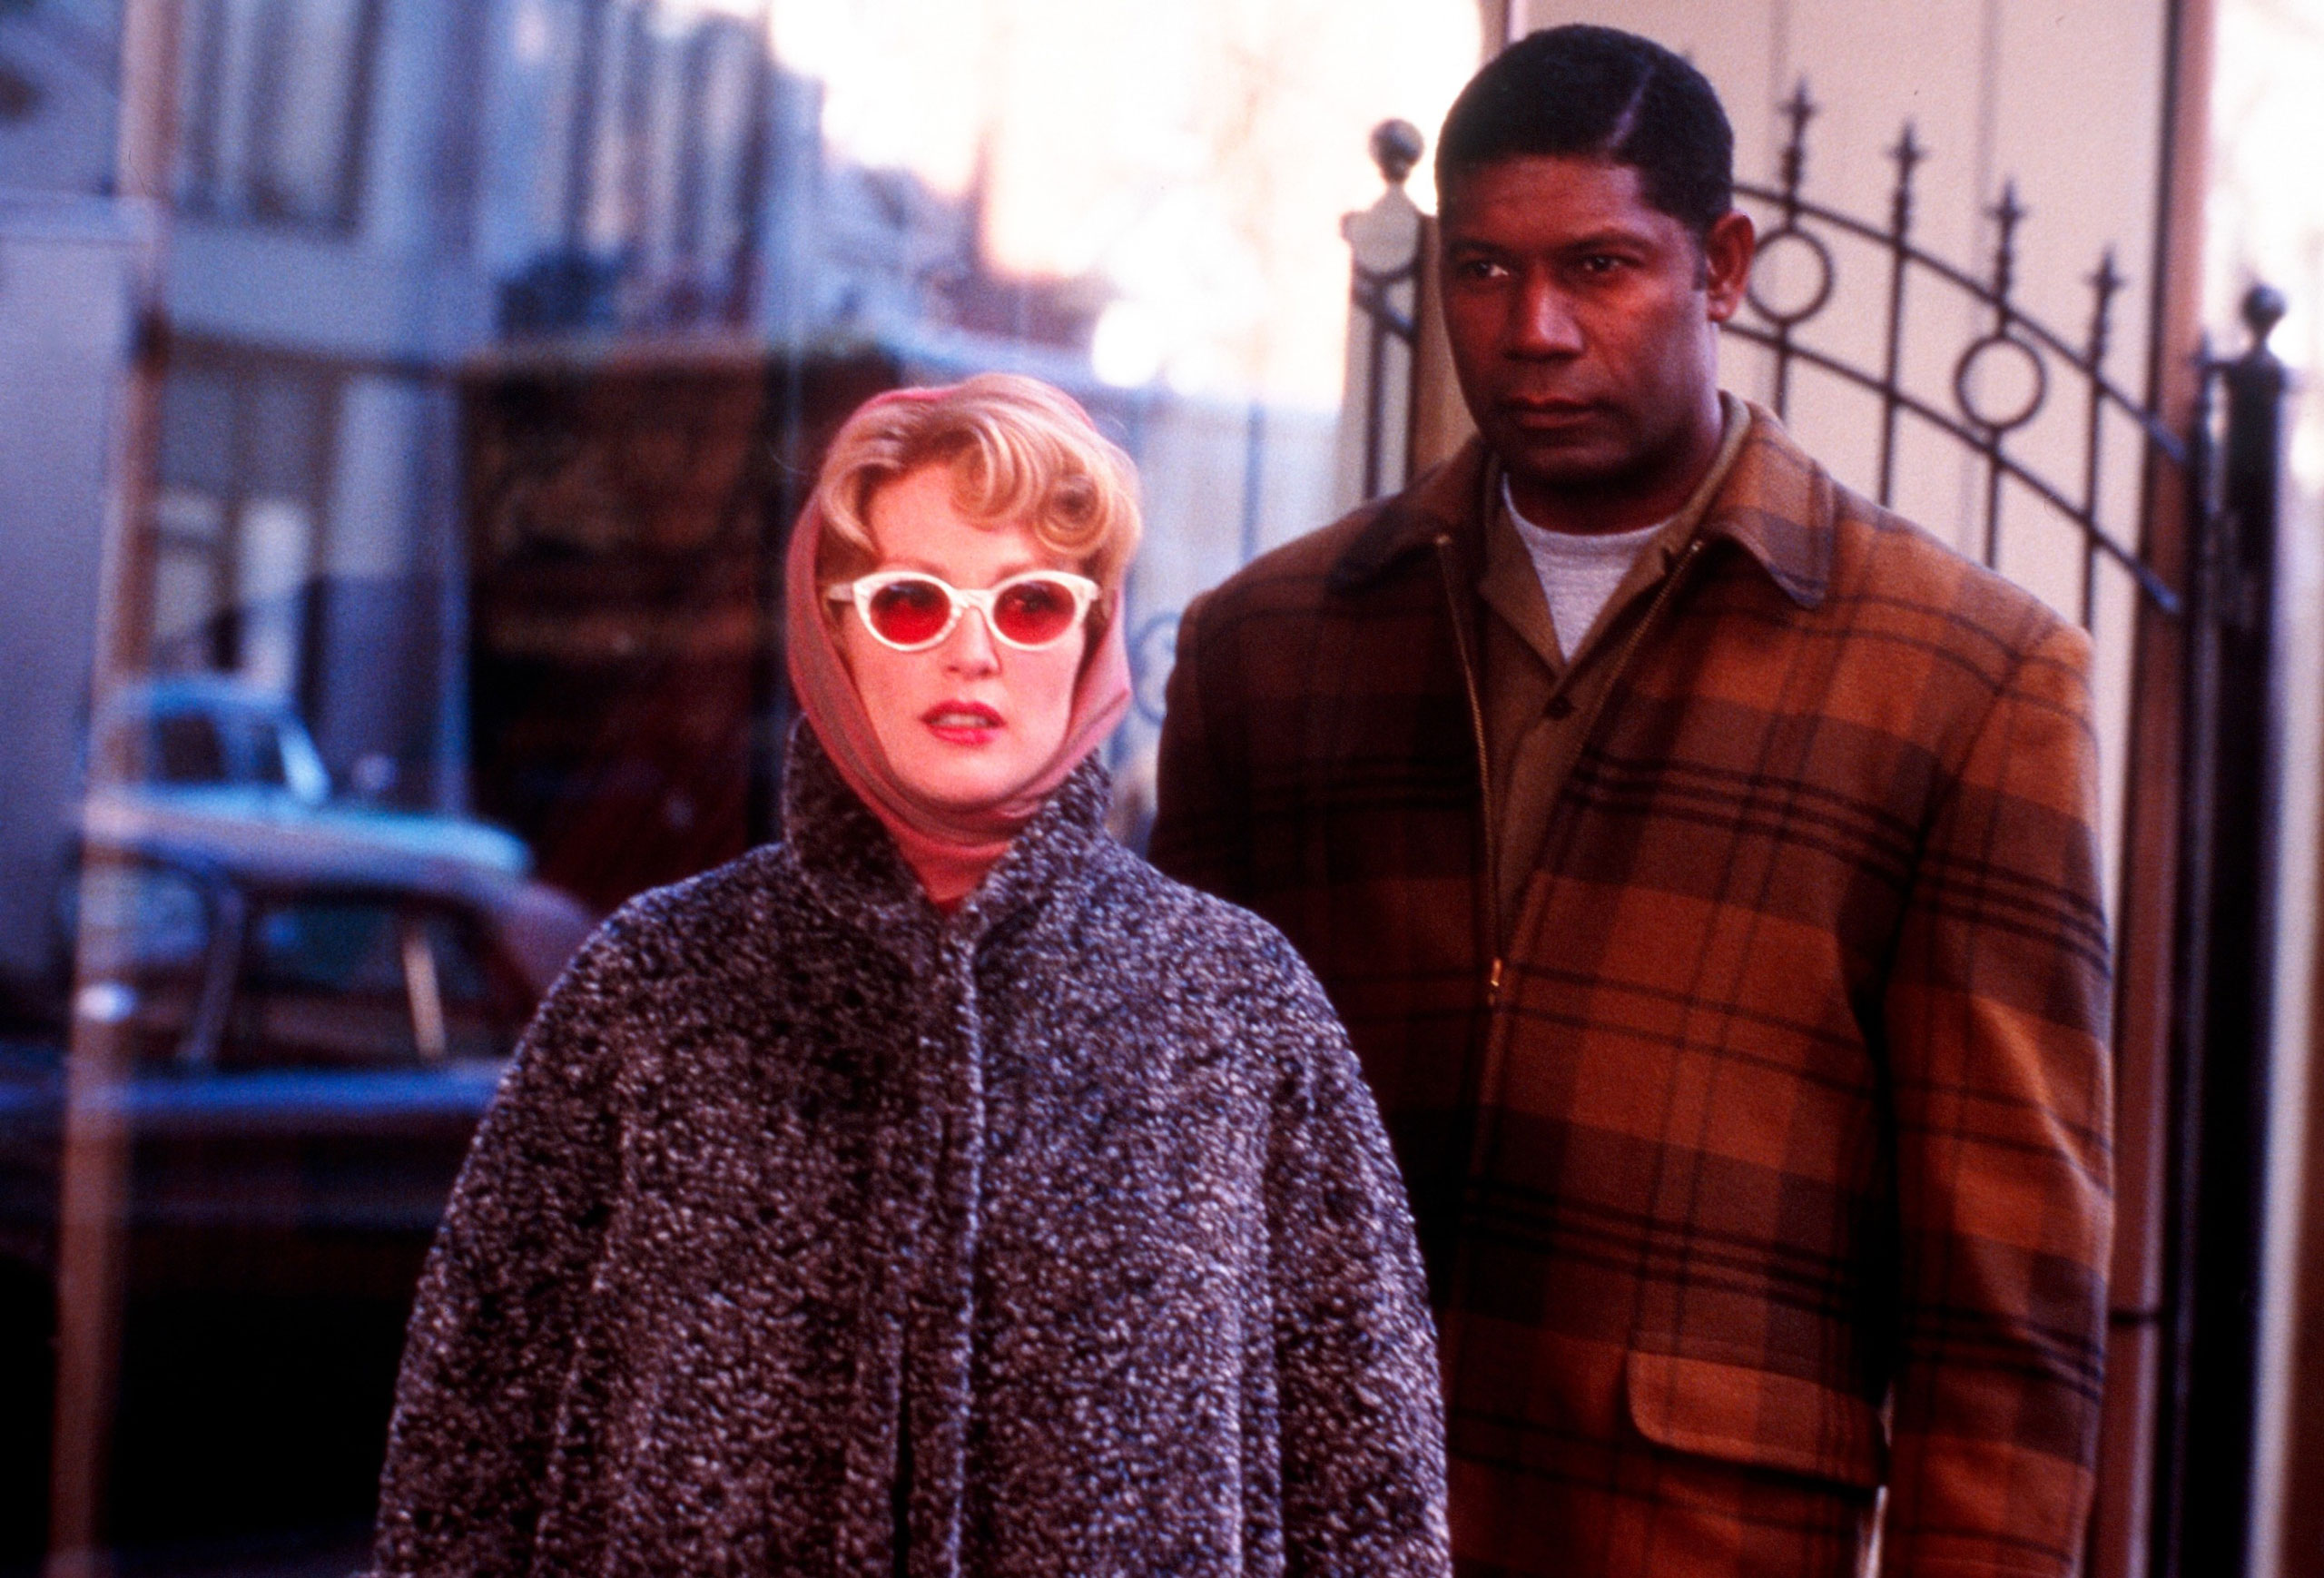 Julianne Moore and Dennis Haysbert in <i>Far From Heaven</i>. (Focus Films/Everett Collection)